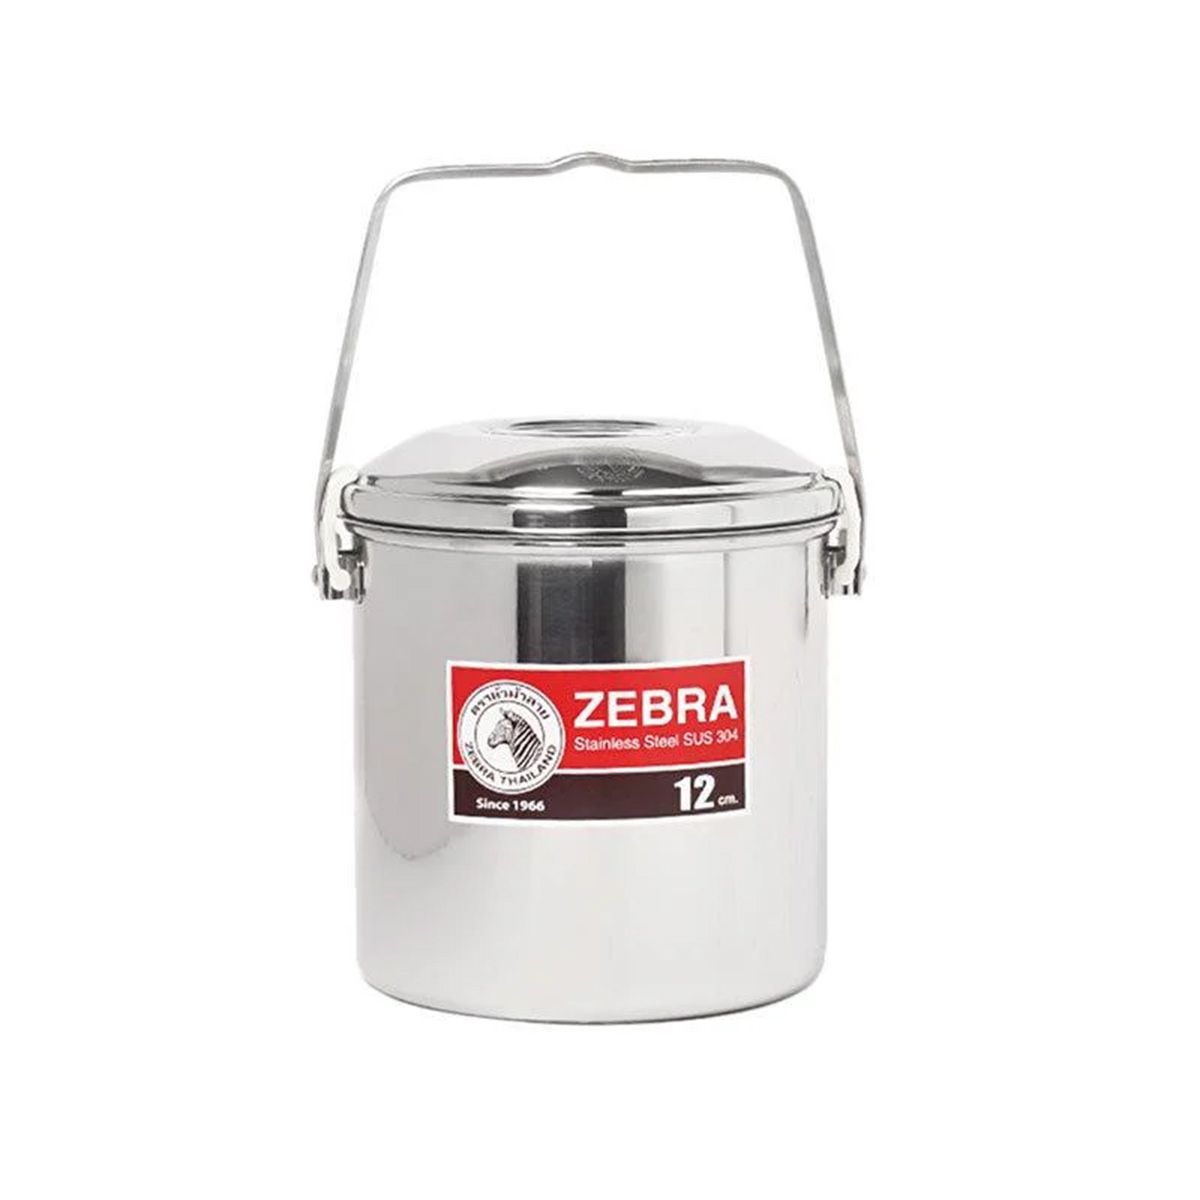 Zebra Stainless Steel Billy Camping Pots